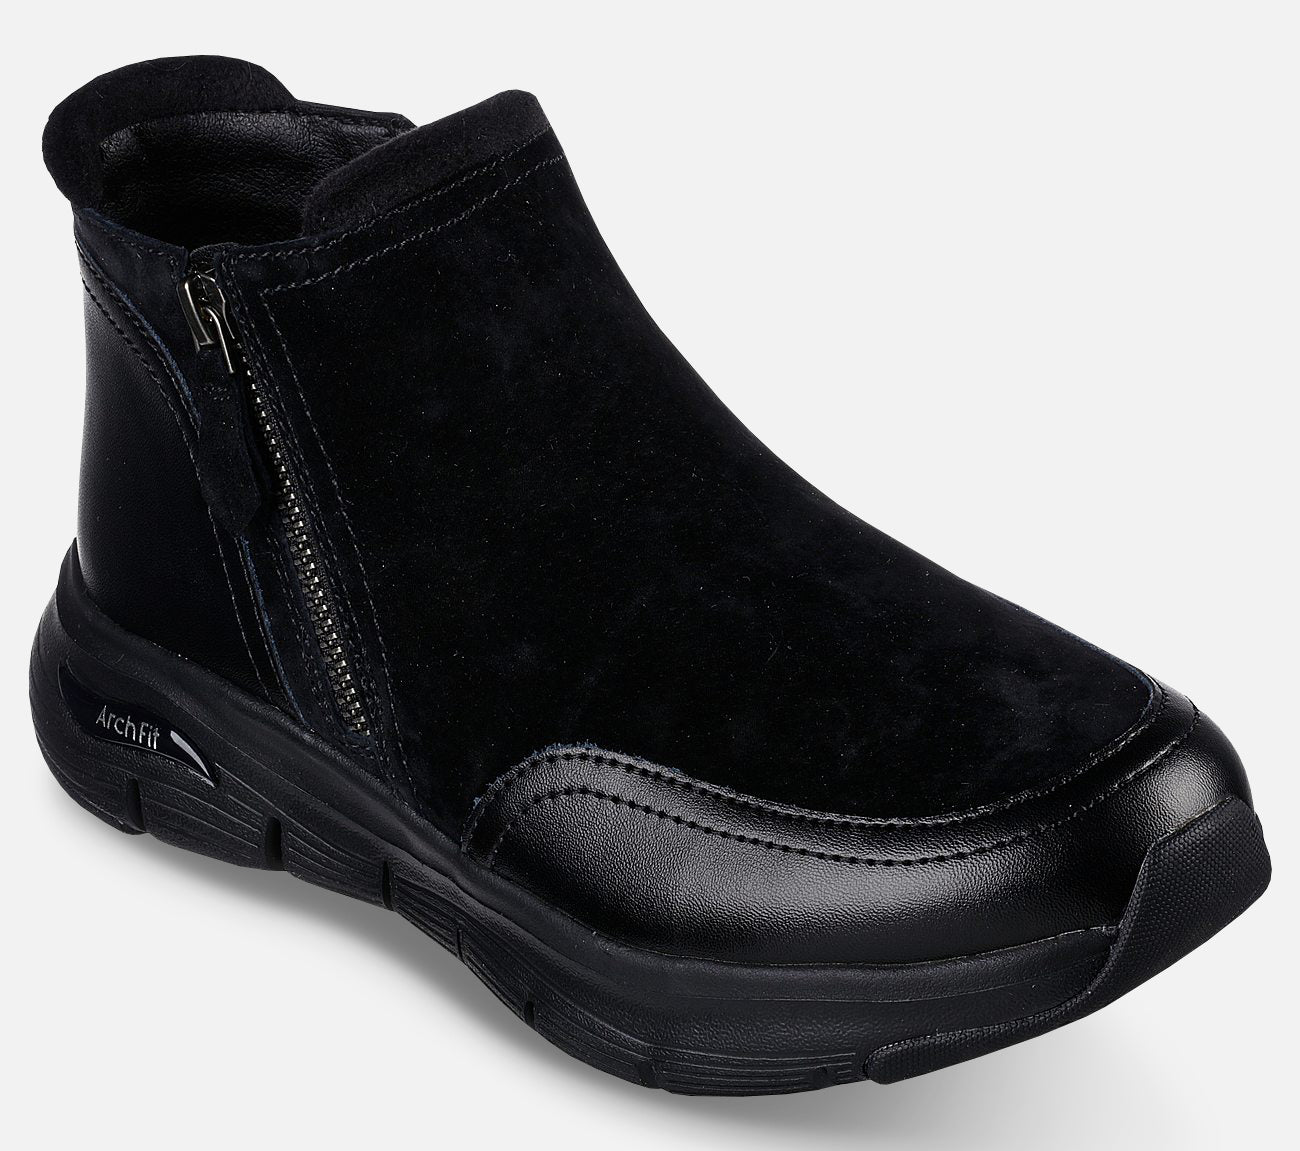 Arch Fit Smooth - Modest - Water Repellent Boot Skechers